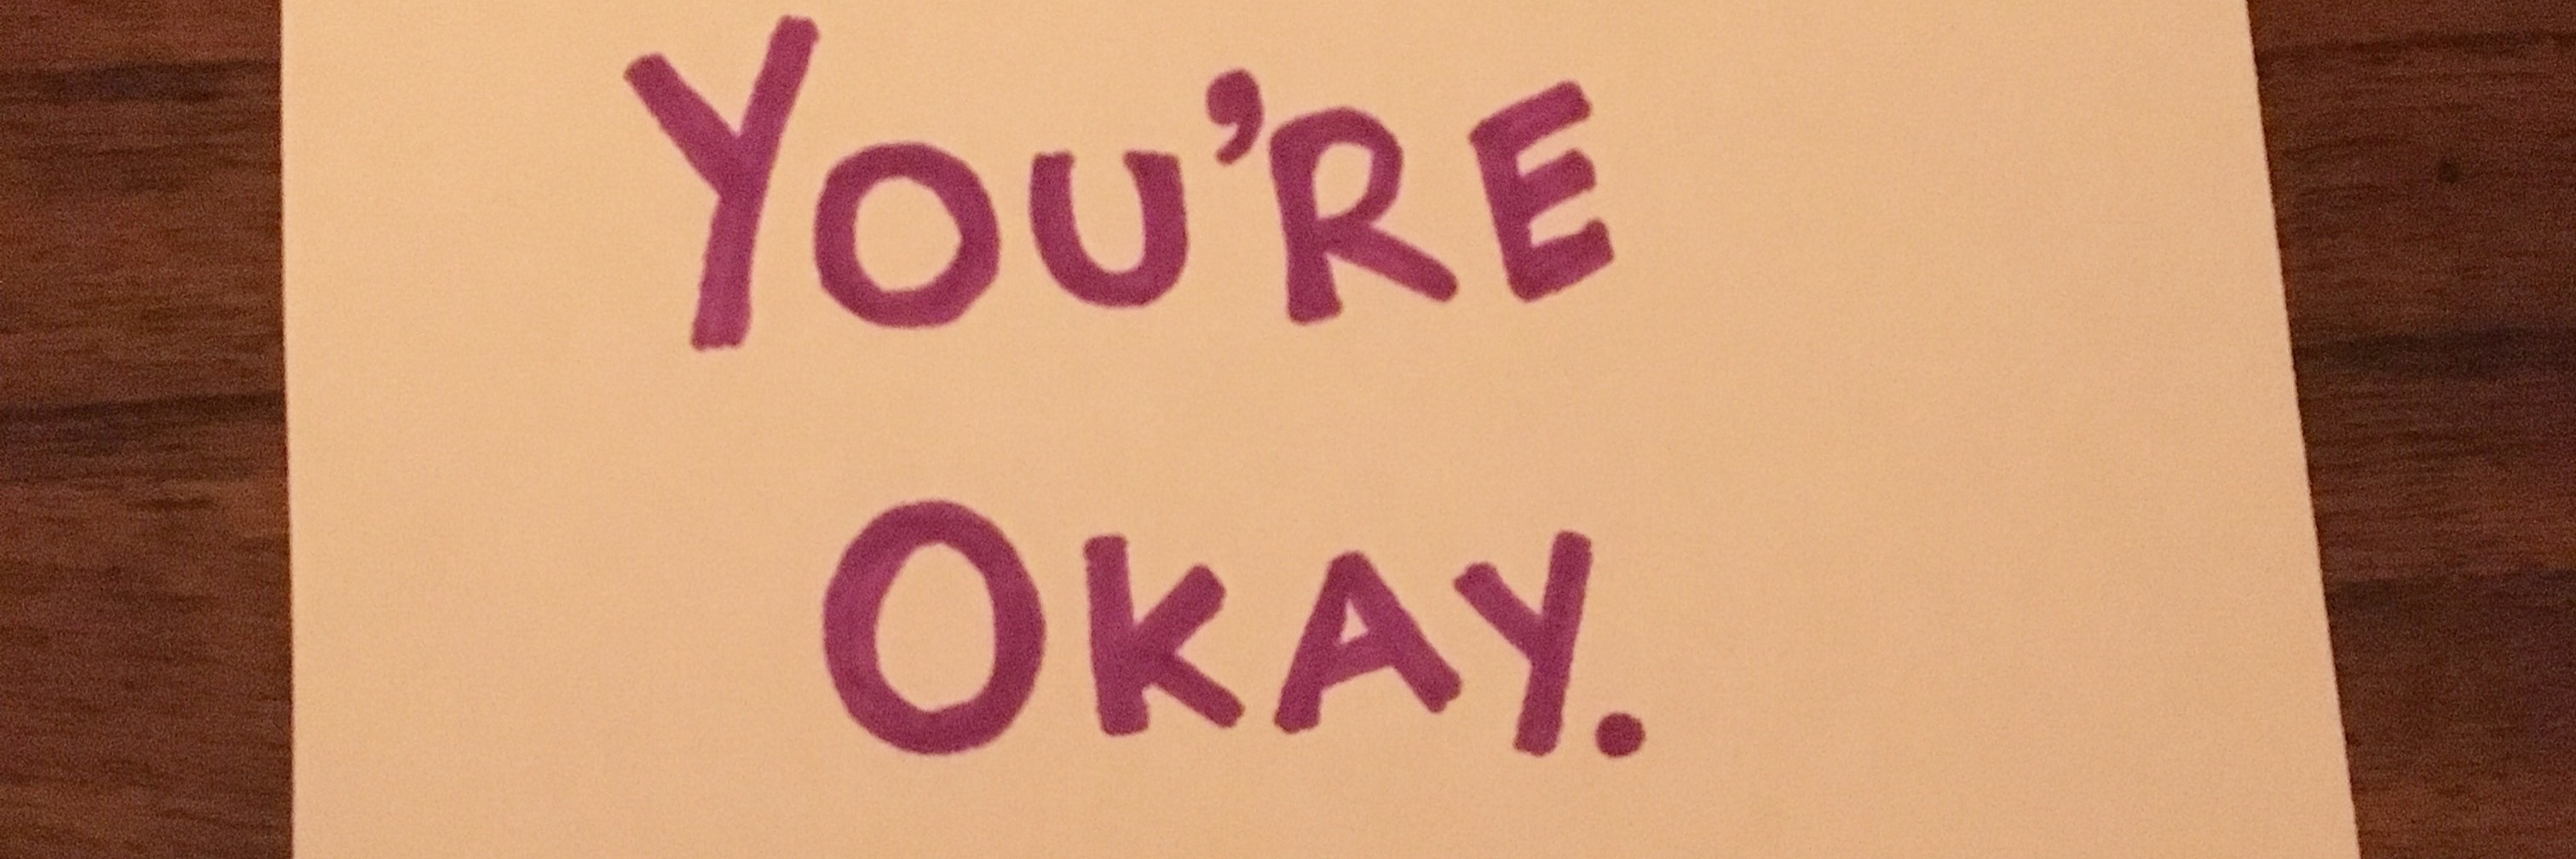 post it note on wooden table in pink text with words you're okay